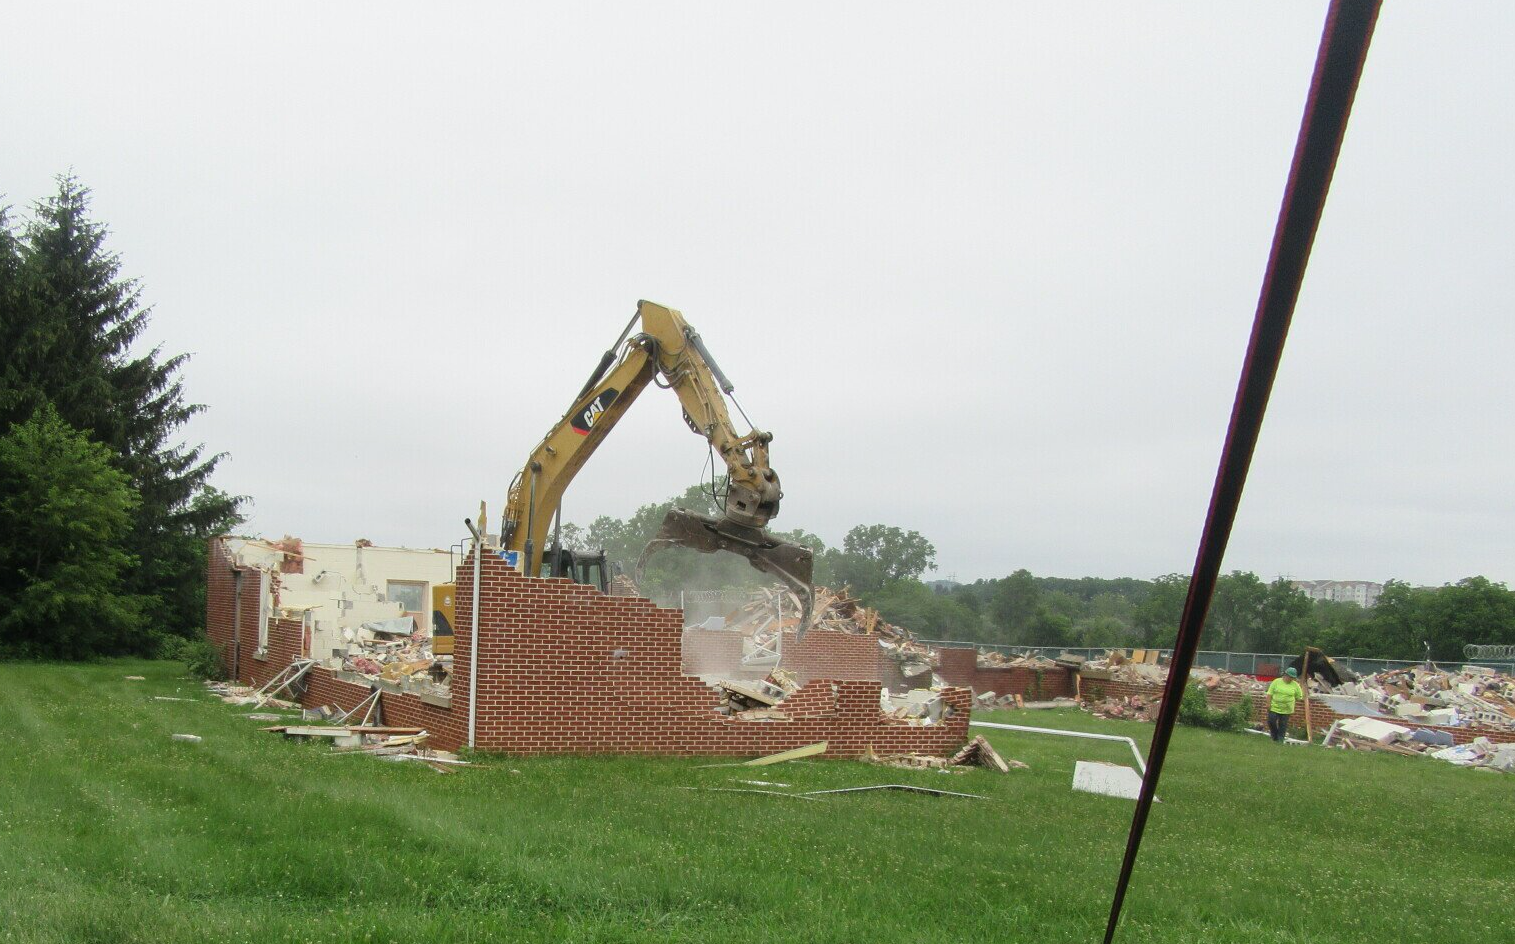 An excavator is demolishing a brick building in a field